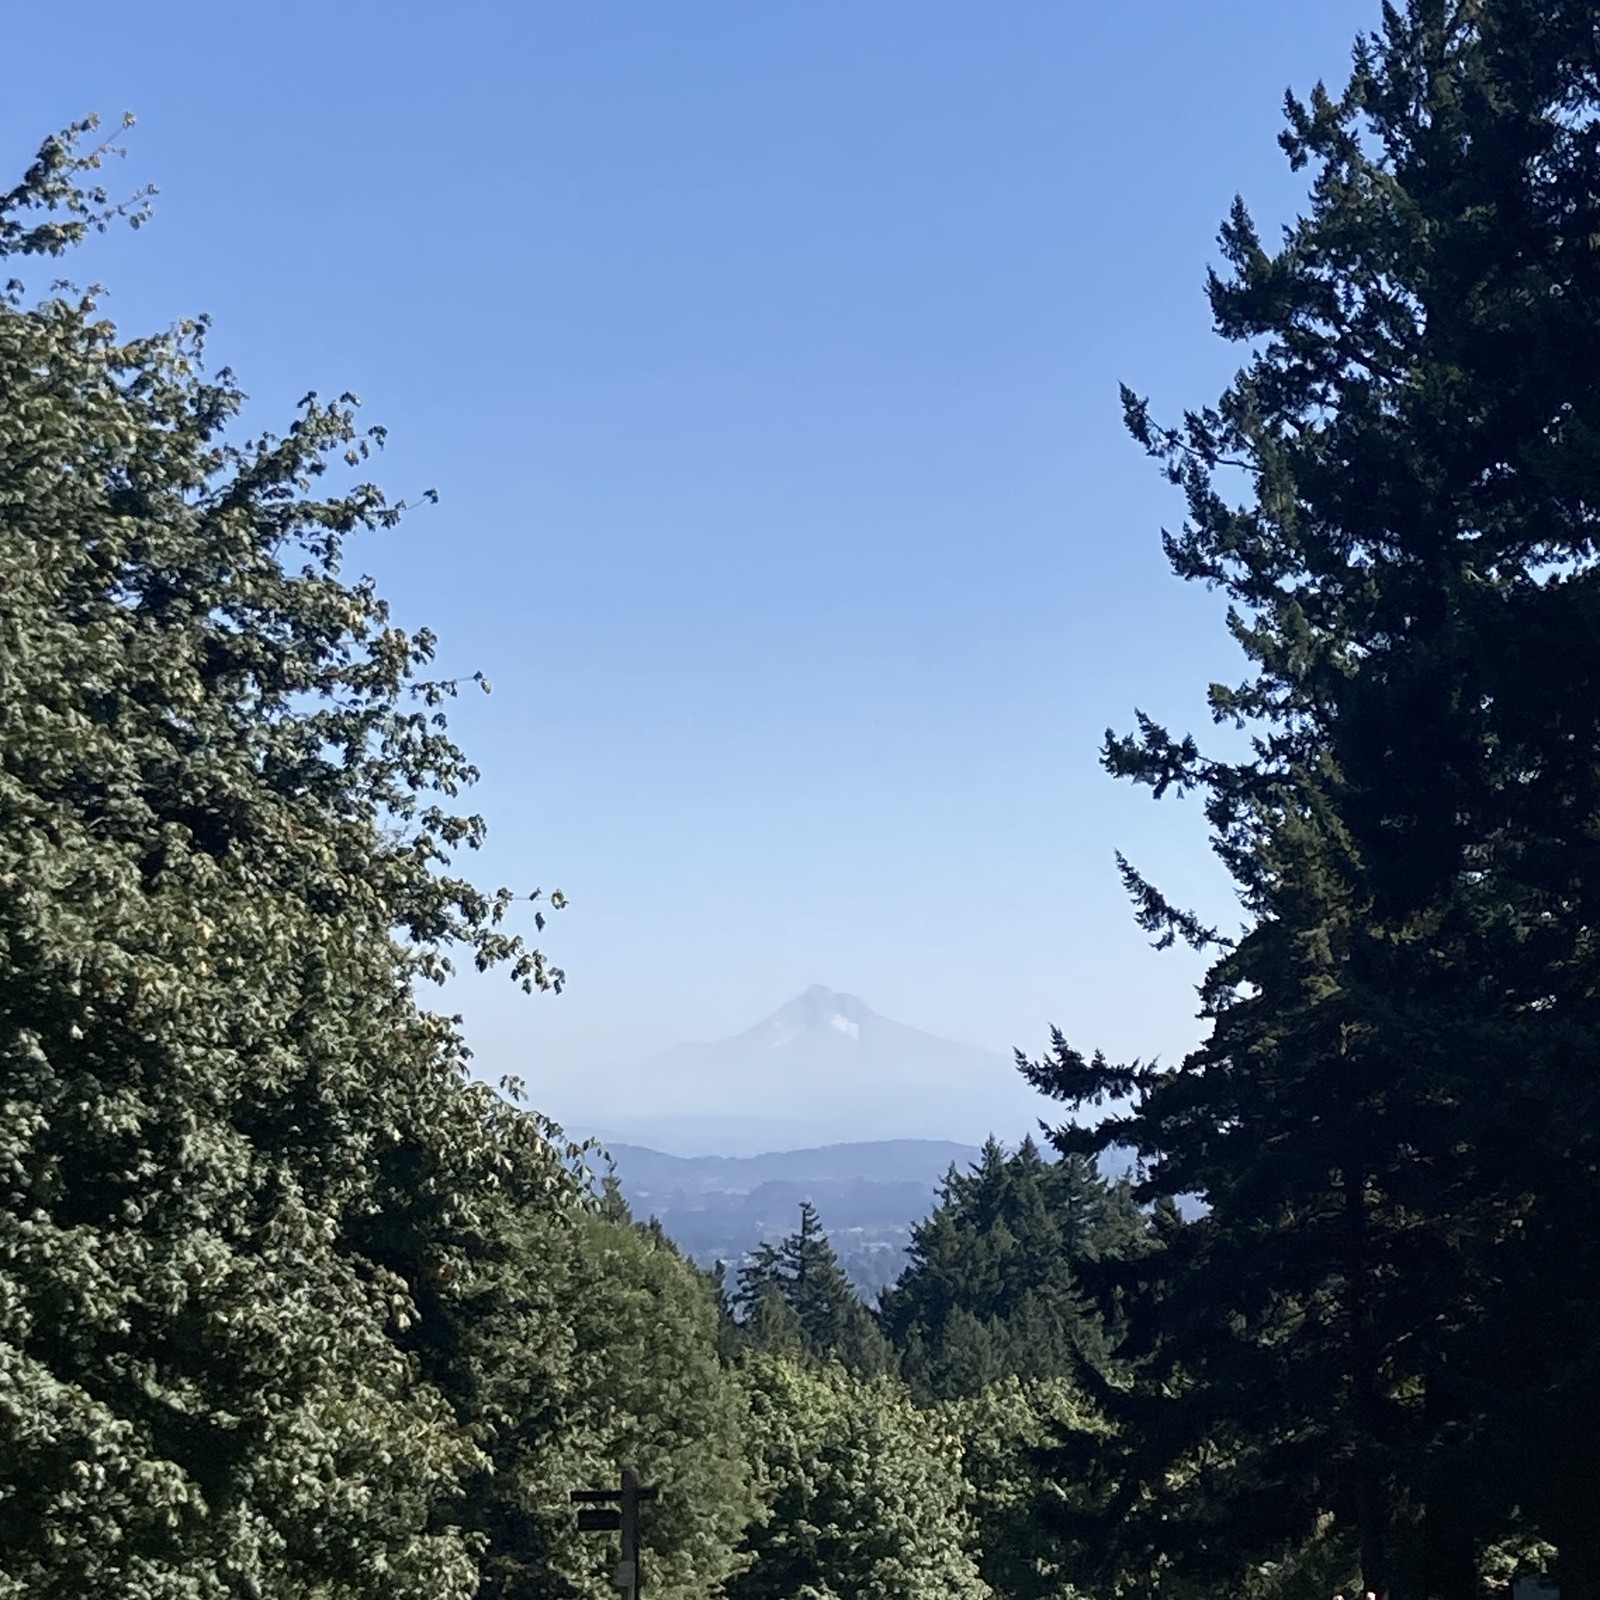 Mount Hood as seen from Council Crest on a warm late summer day. There is very little snow left on the glaciers